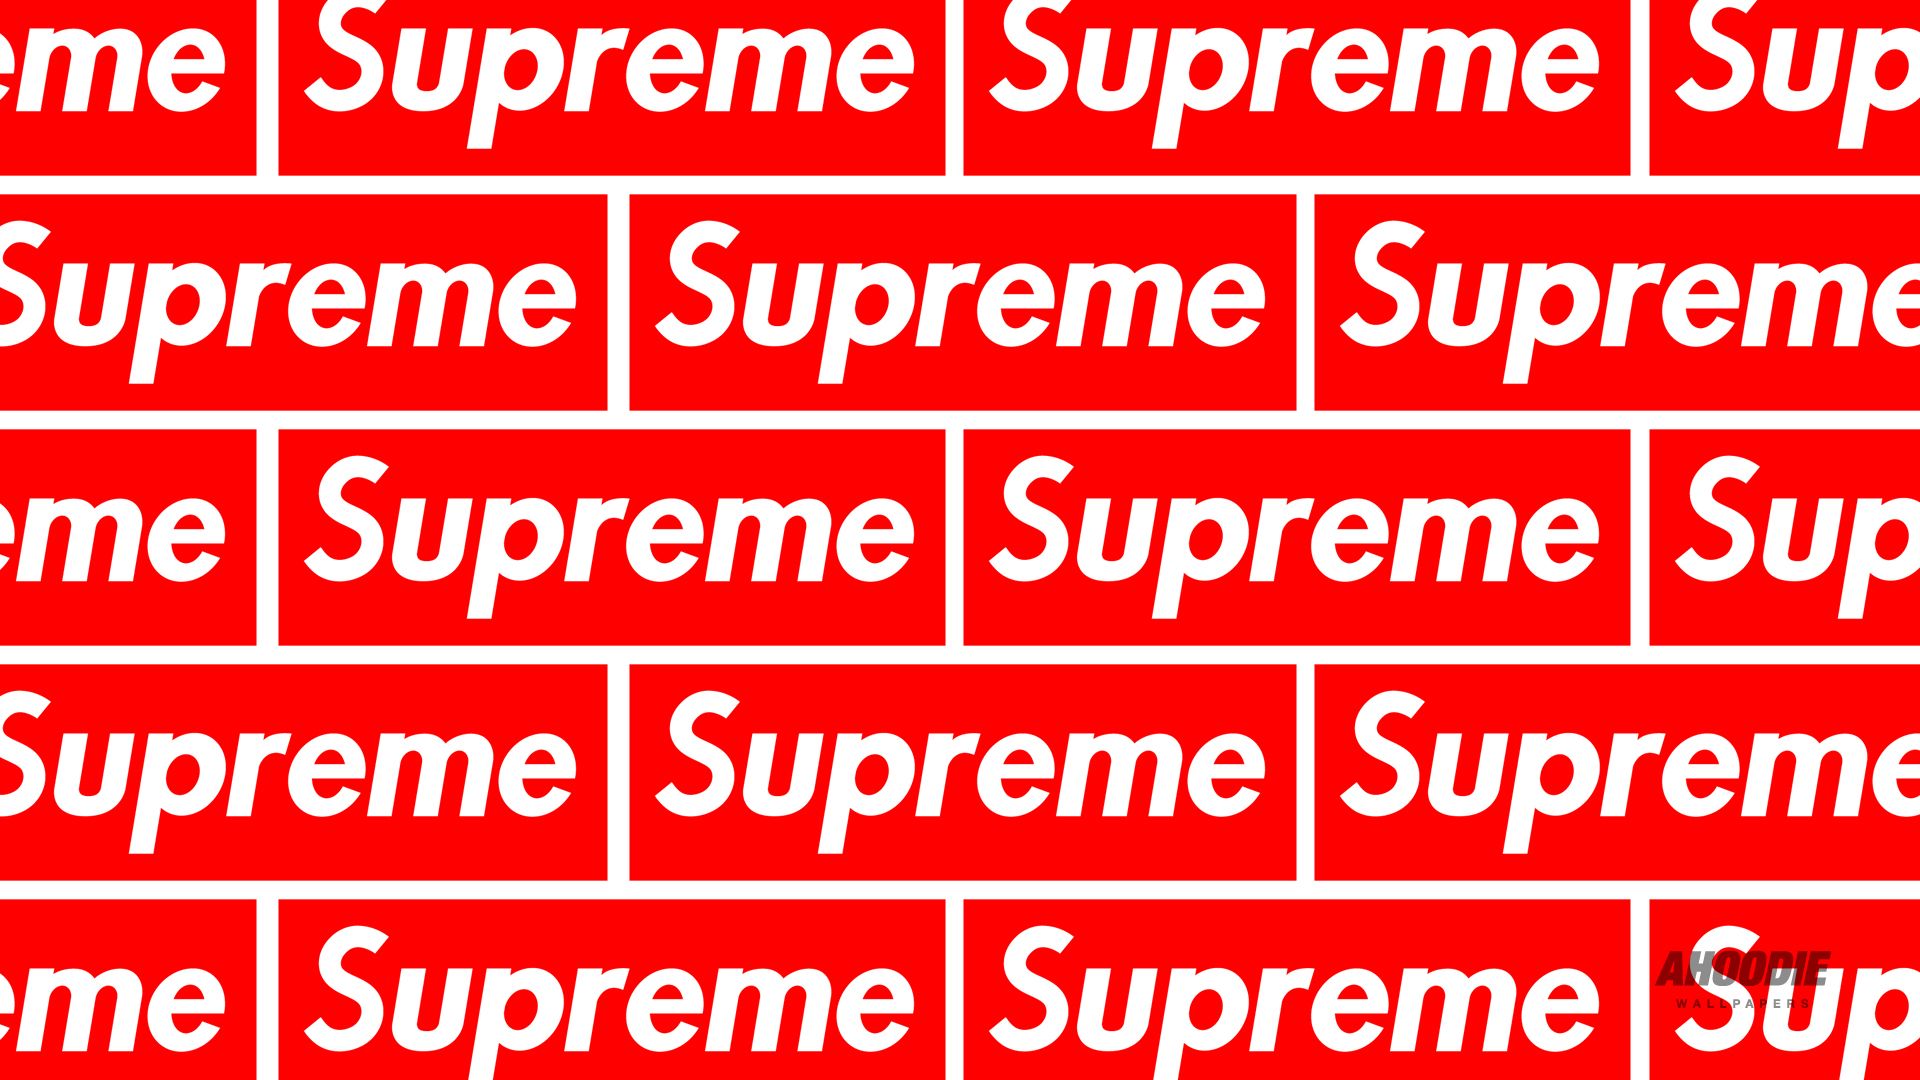 Commentary: My Annoyance With Supreme Has Nothing To Do With Supreme • KicksOnFire.com